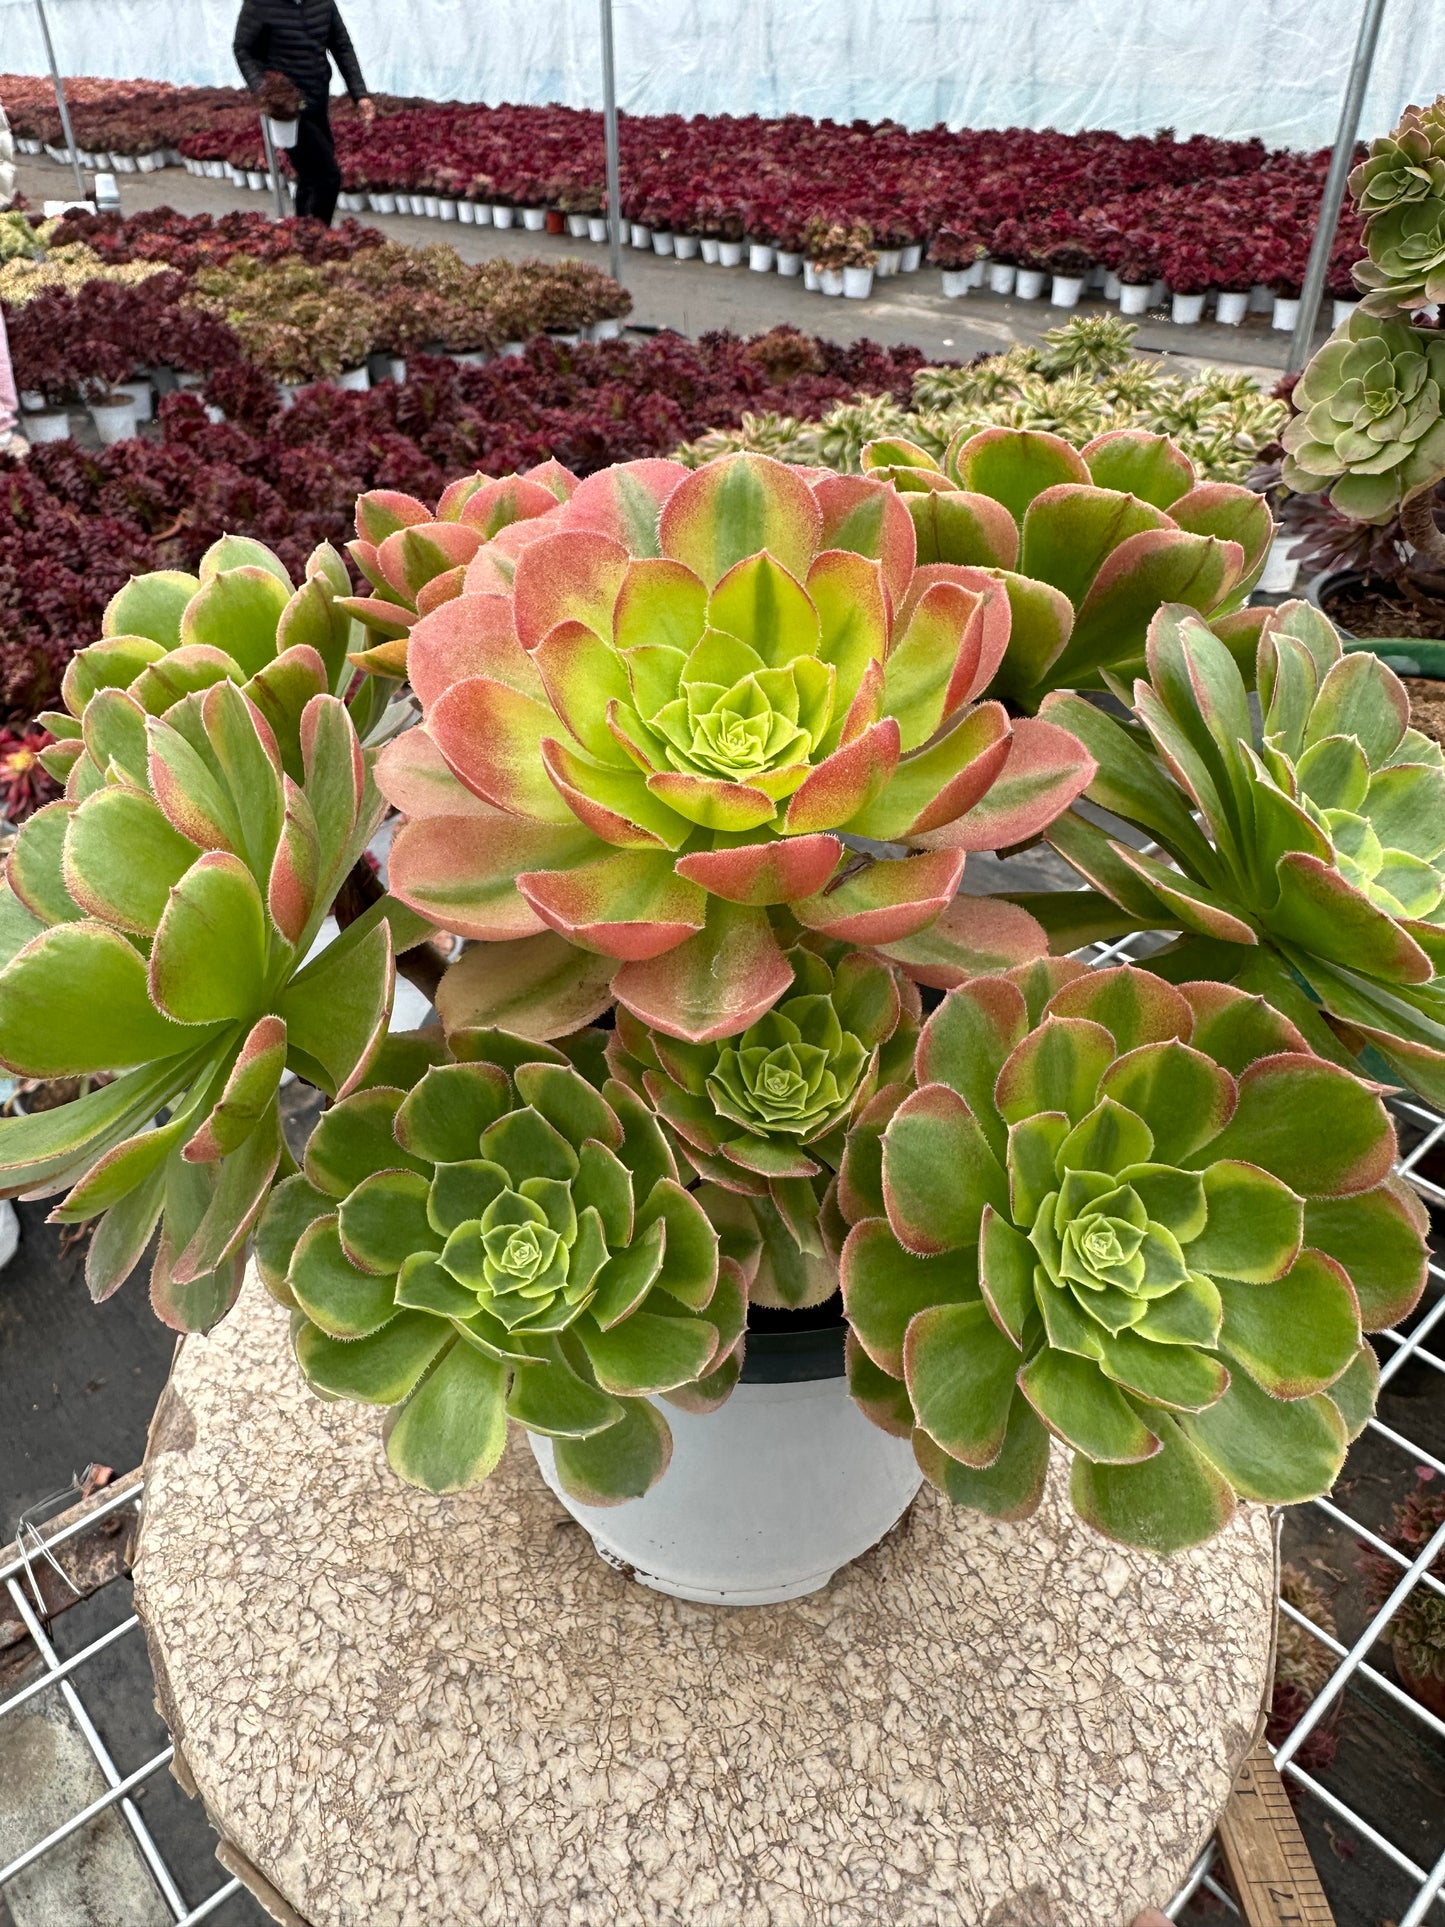 Halloween variegate cluster20-30cm Old pile/ 10-20 heads/ Aeonium cluster / Variegated Natural Live Plants Succulents2023